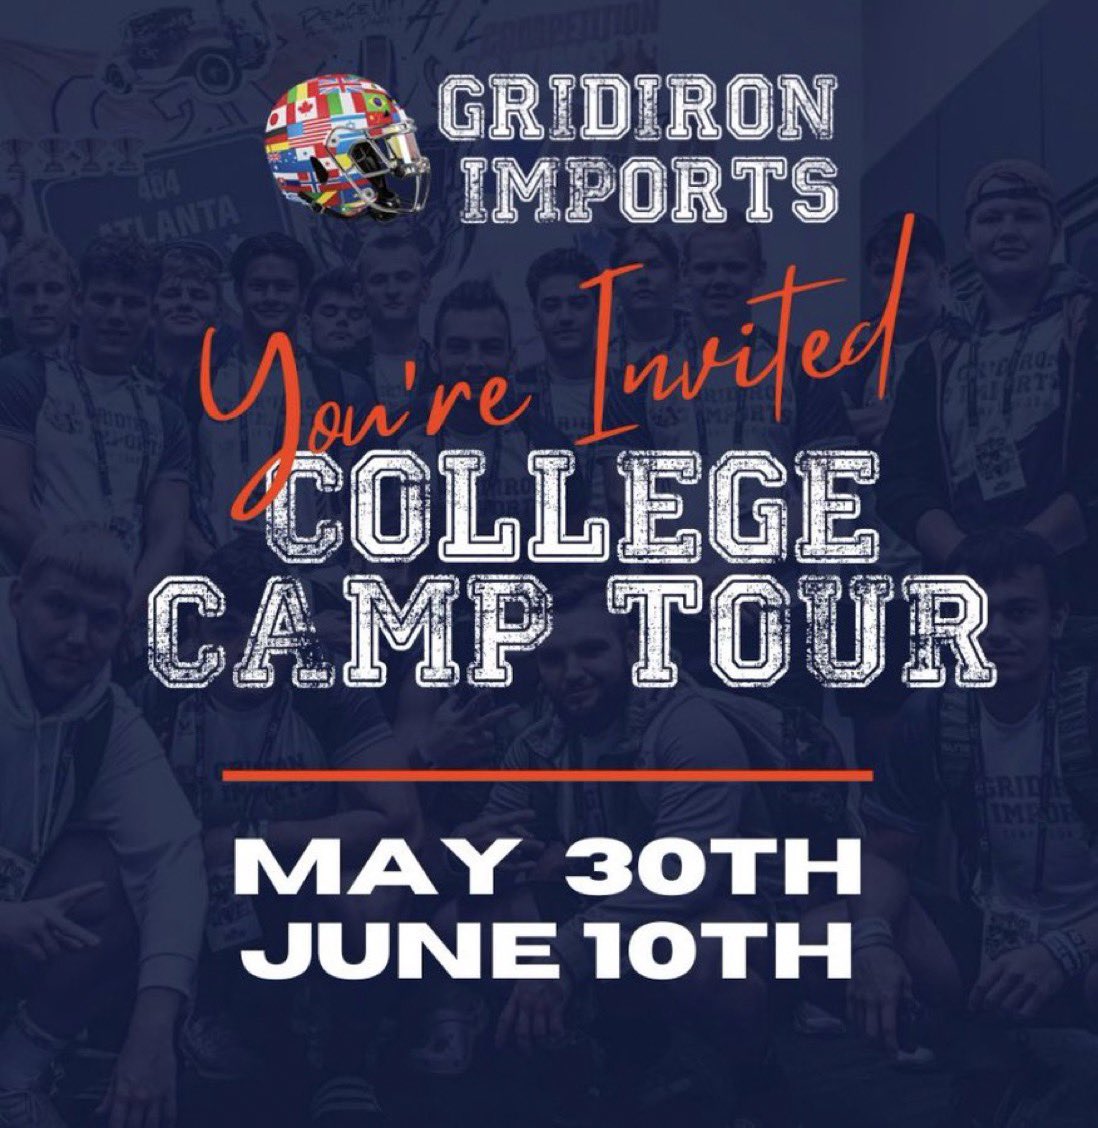 Excited to be apart of this years College Camp Tour. Looking forward to competing! @GIfootballChris @GridironImports @coach_spinnato @CRHFootball